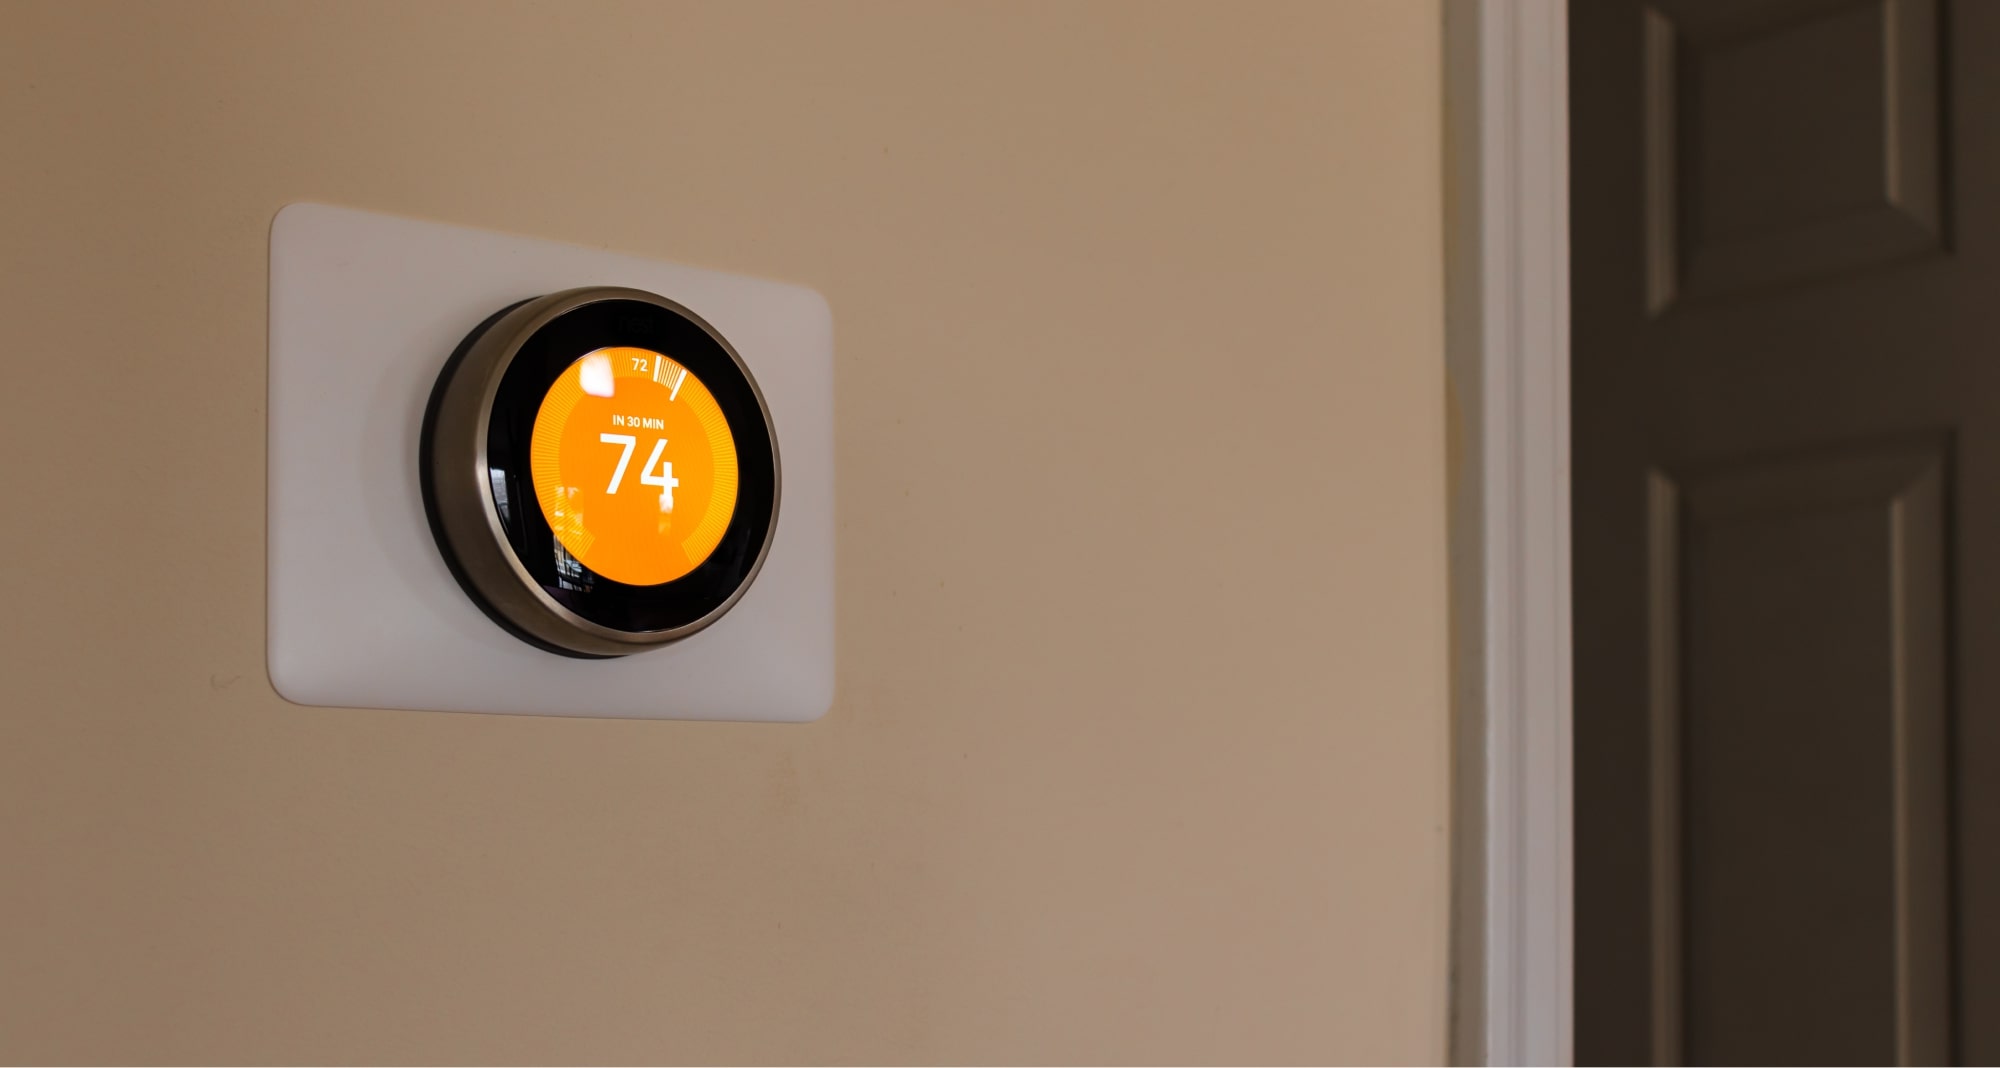 https://www.softeq.com/hubfs/Featured-Work/Images-Solution/device-management-suite-for-daikin-smart-thermostats-and-indoor-air-quality-sensors.jpg